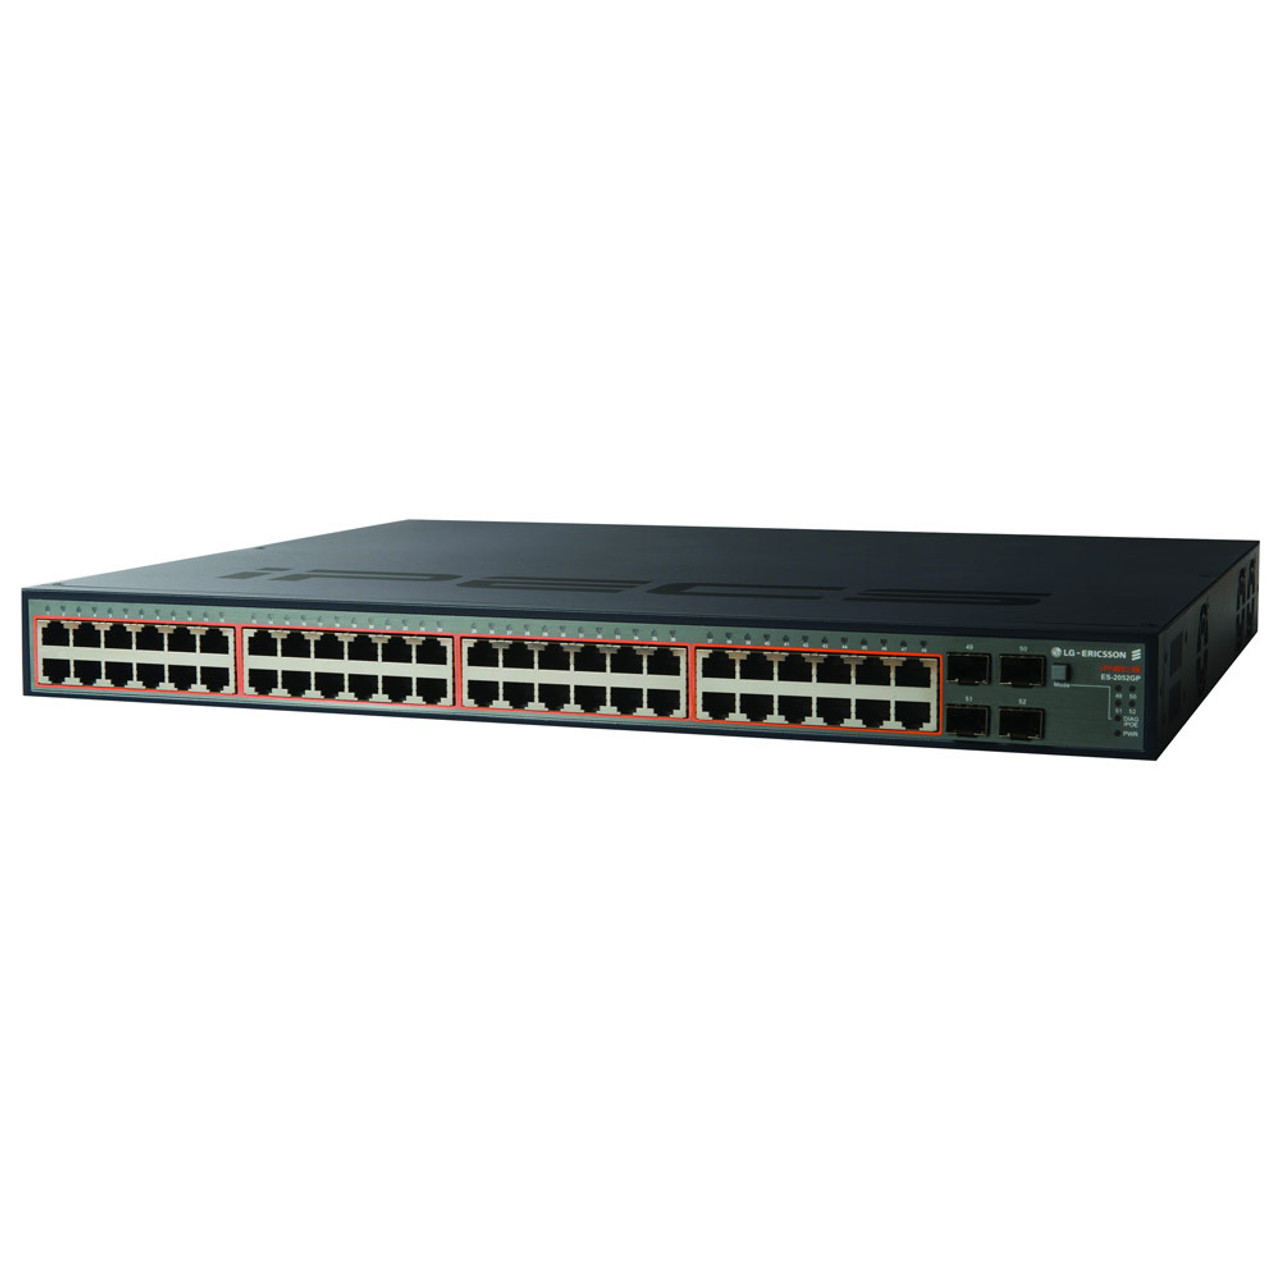 ES-2052GP LG iPECS 48-Ports 10/100/1000 Smart Switch with PoE and 4 SFP Ports (Refurbished)